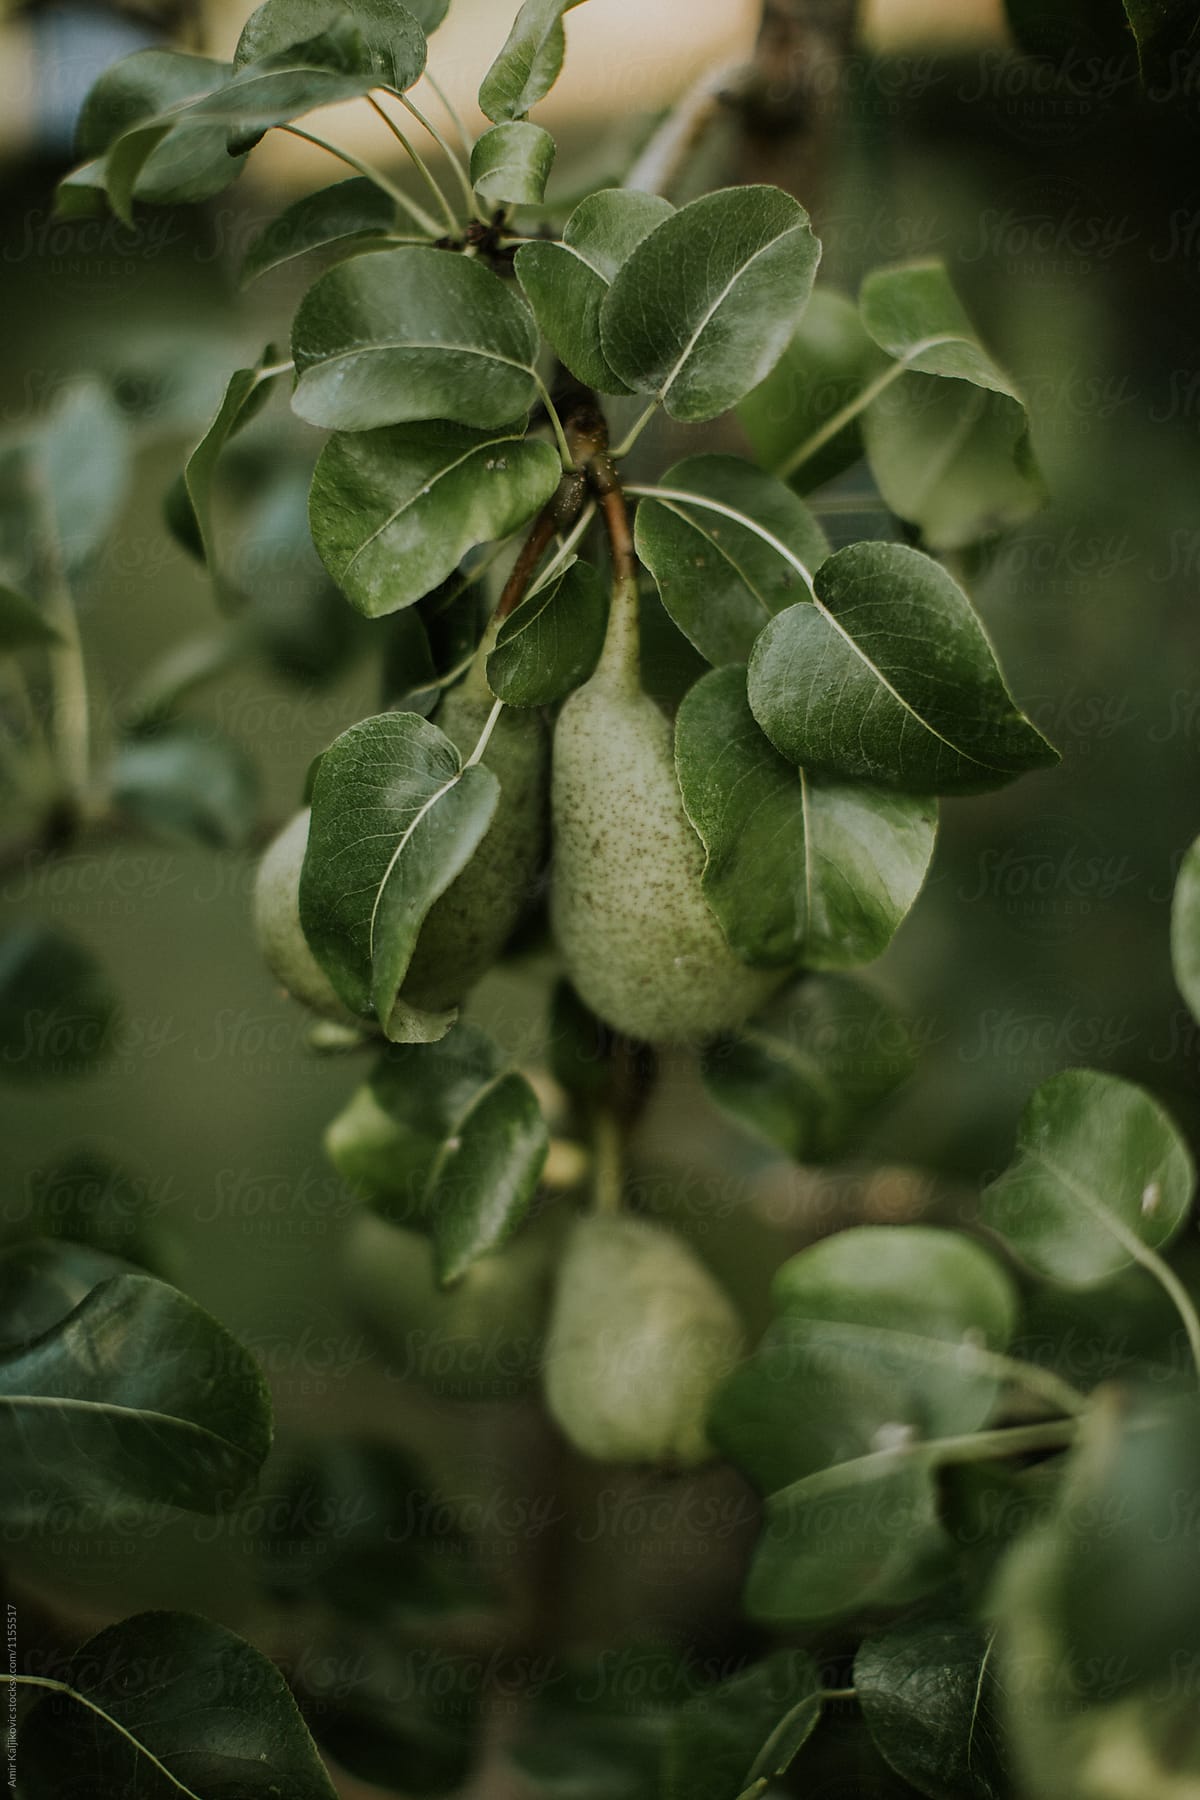 Ripening avocado pears growing on a tree